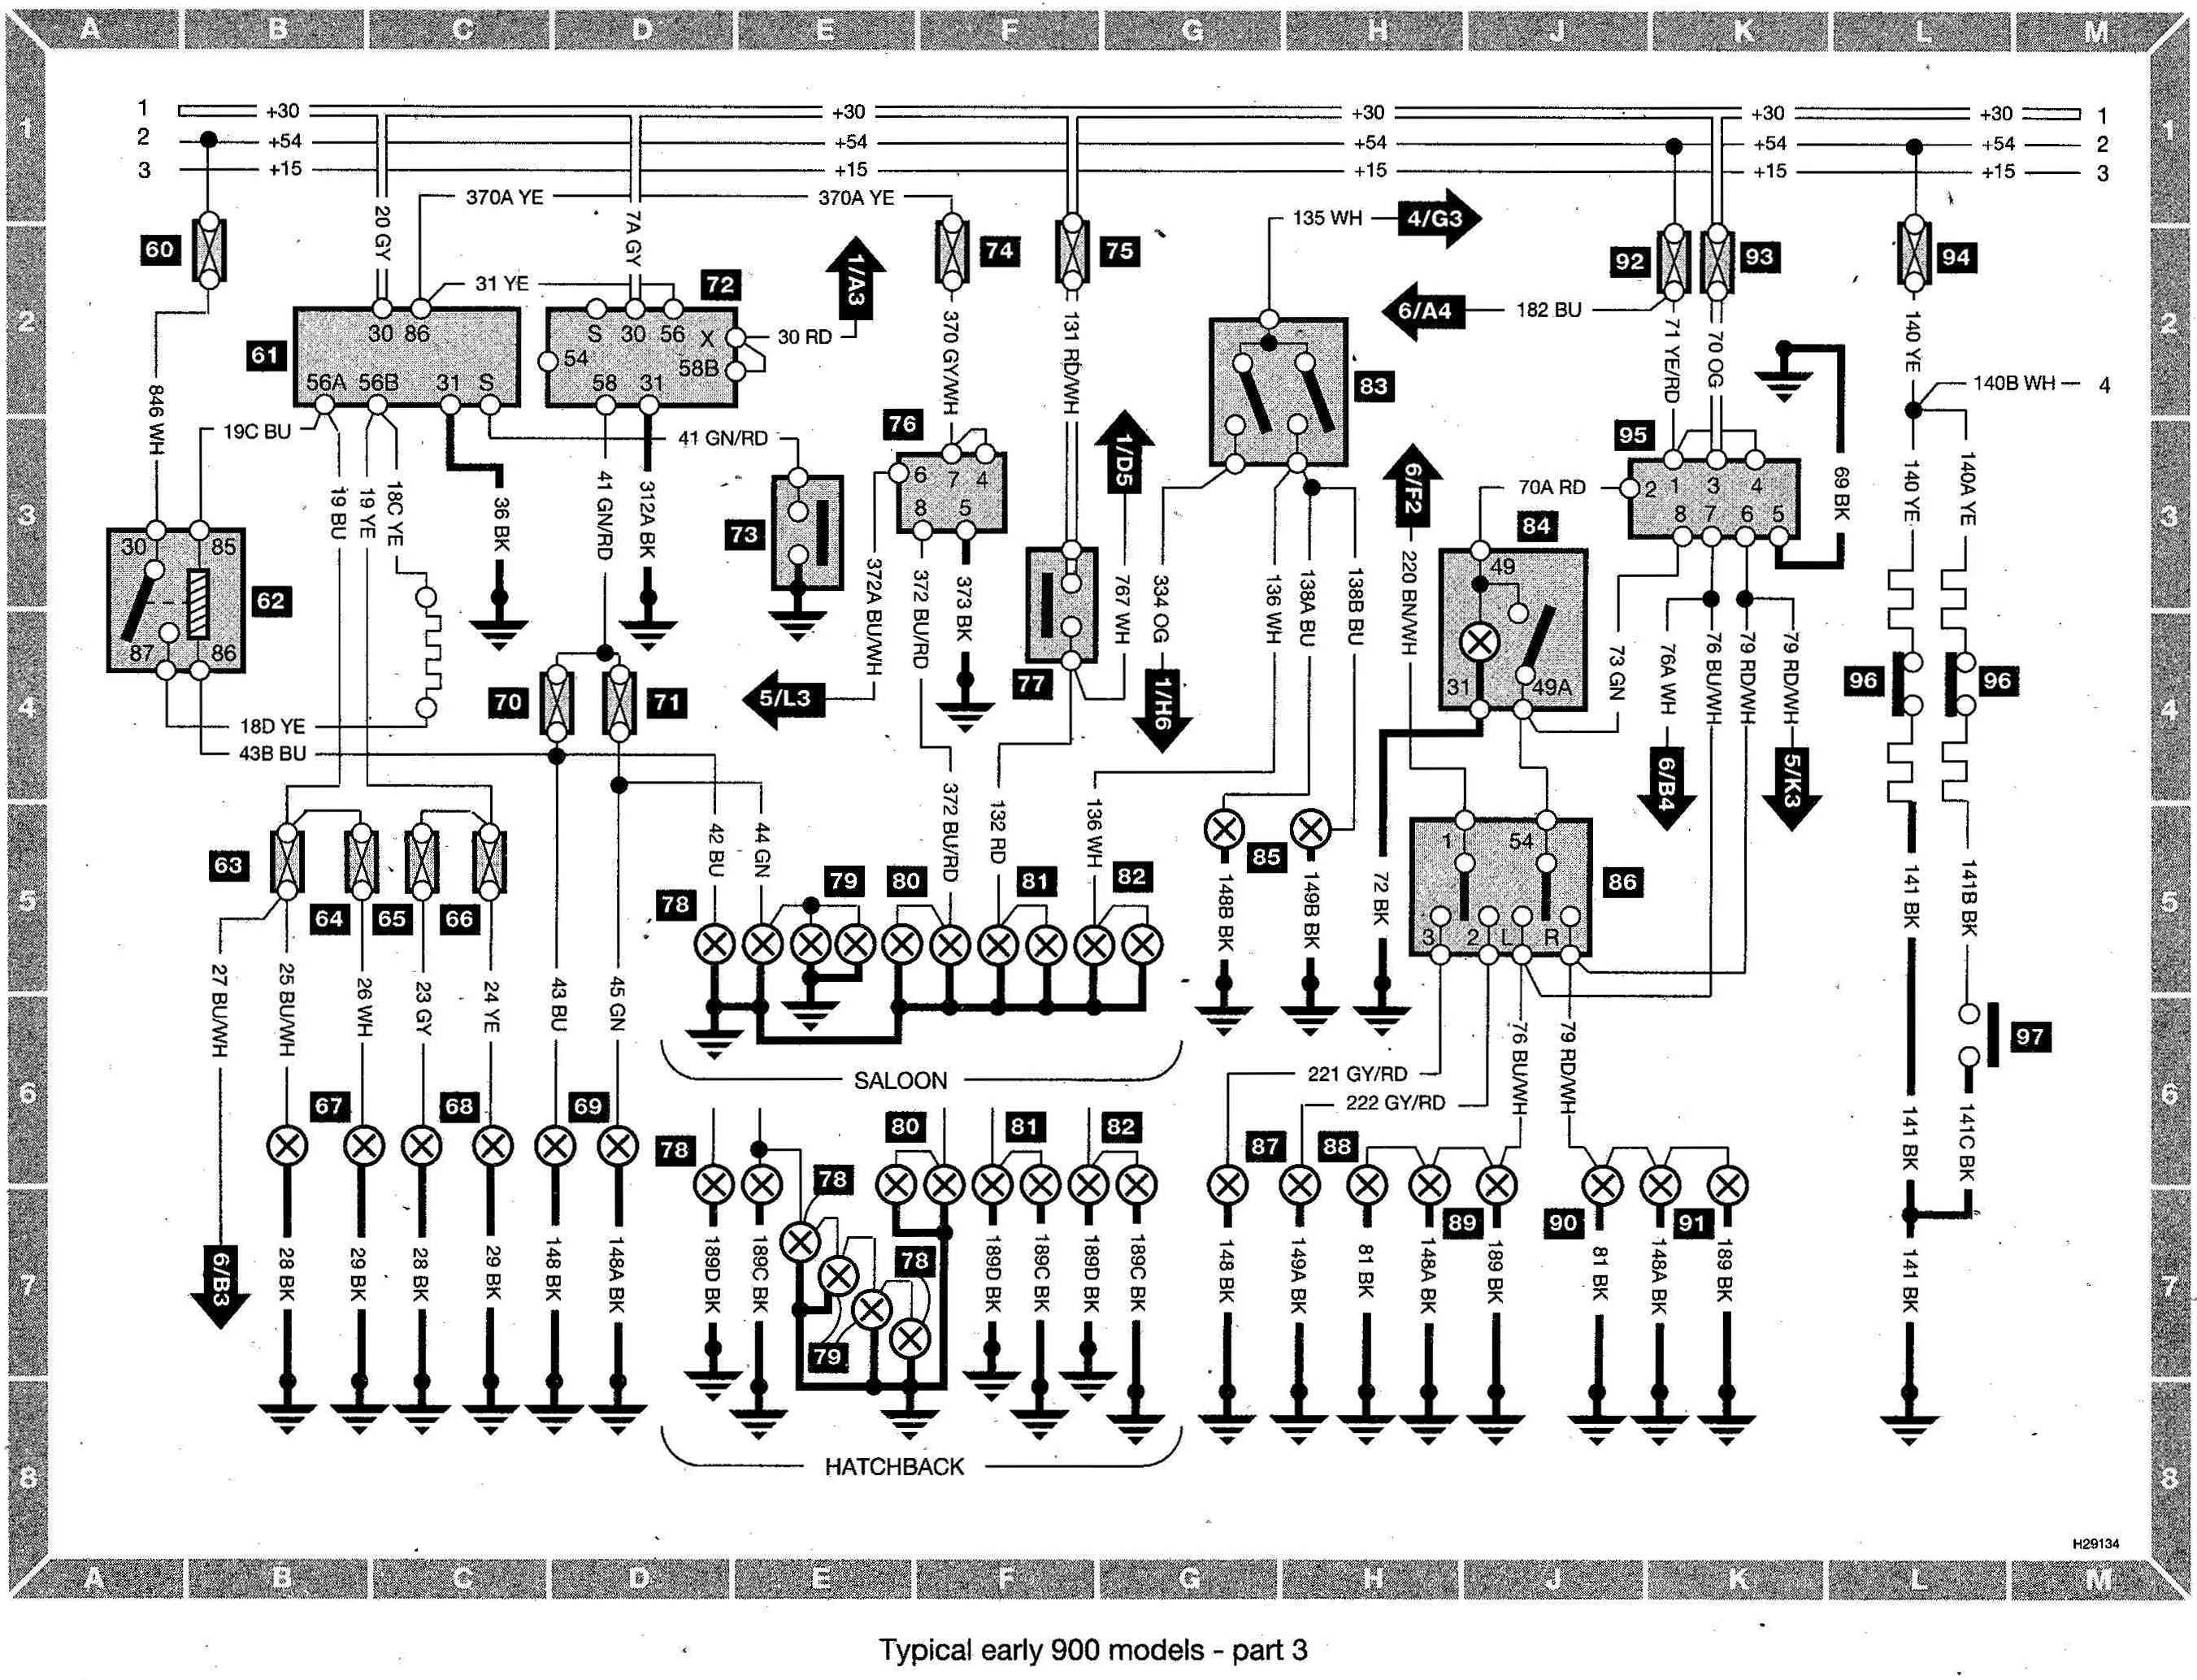 Saab 9-3 Wiring Diagram : Saab Wiring Diagram 9 3 - Wiring Diagram and